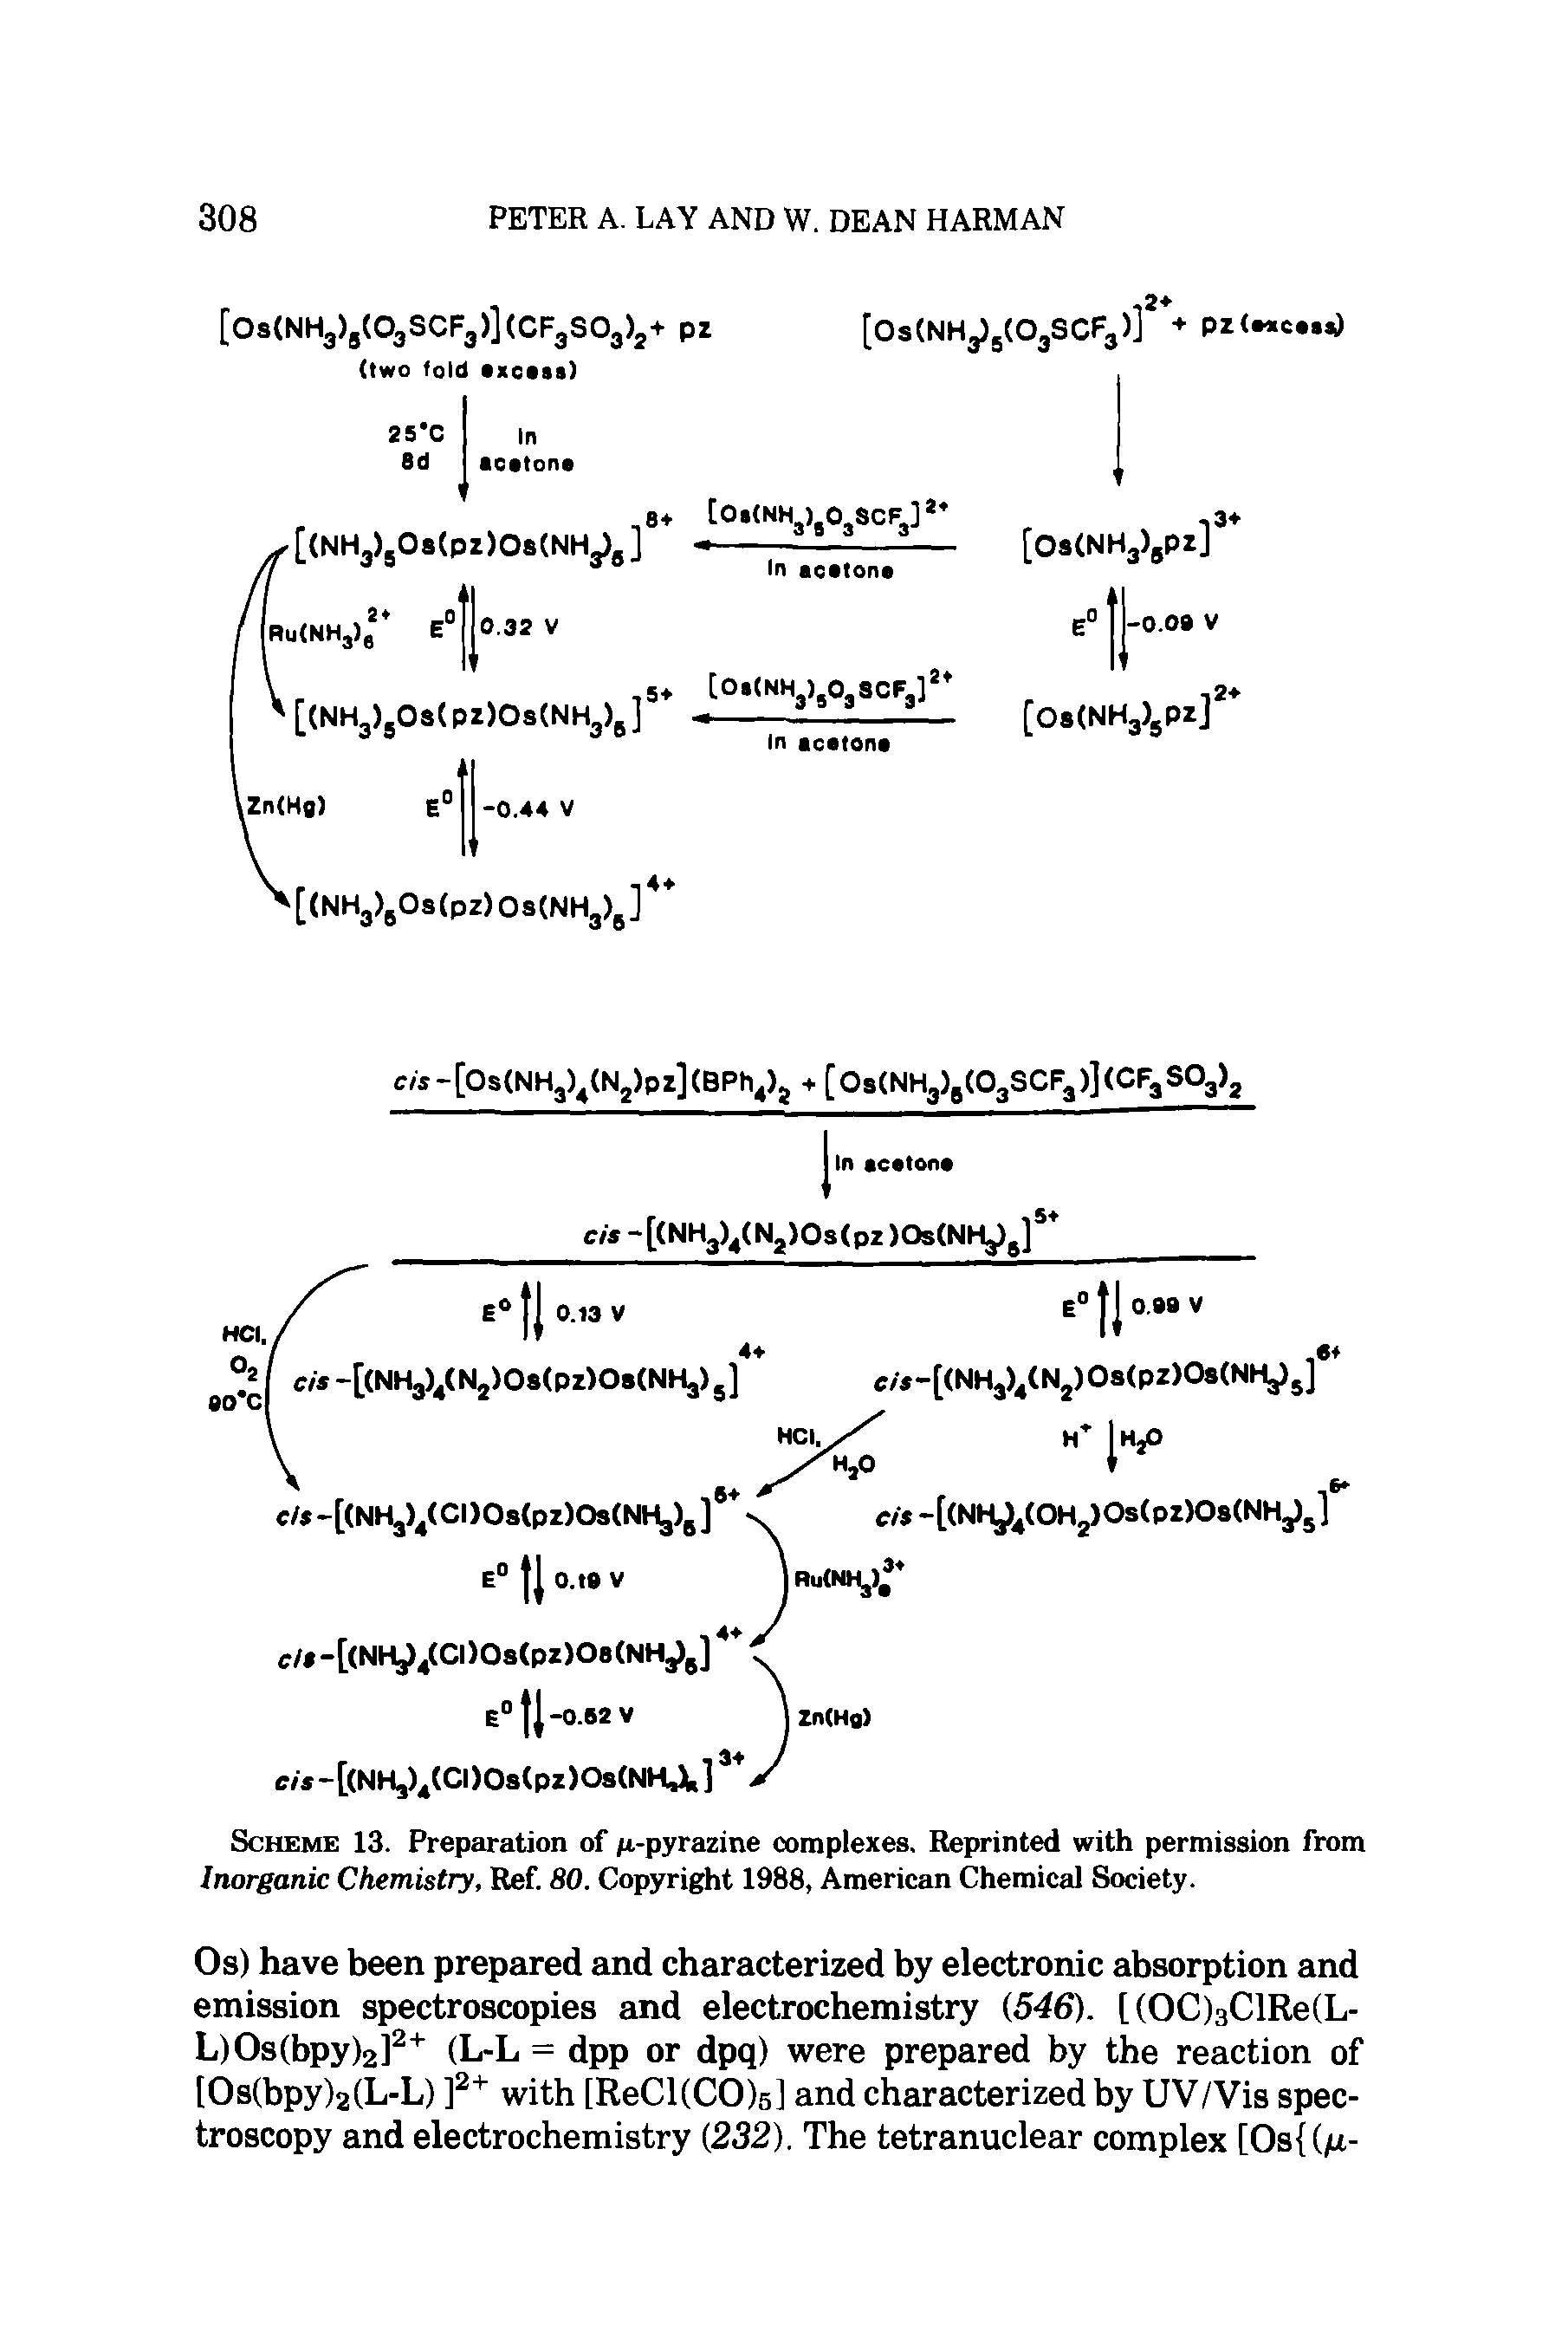 Scheme 13. Preparation of p.-pyrazine complexes. Reprinted with permission from Inorganic Chemistry, Ref. 80. Copyright 1988, American Chemical Society.